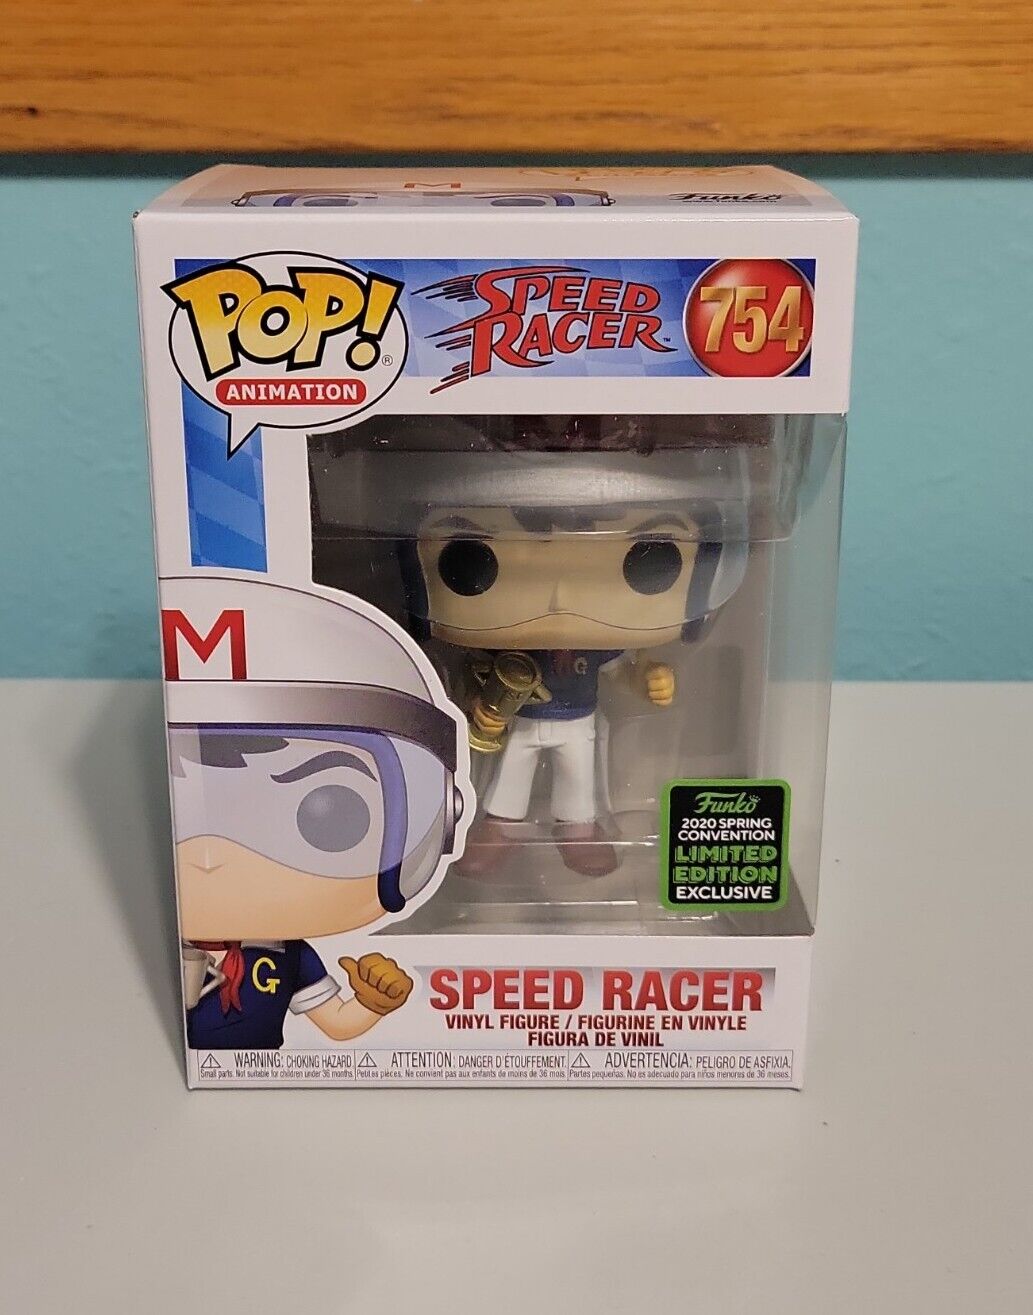 Funko POP Speed Racer #754 2020 Spring Convention Limited Edition Exclusive